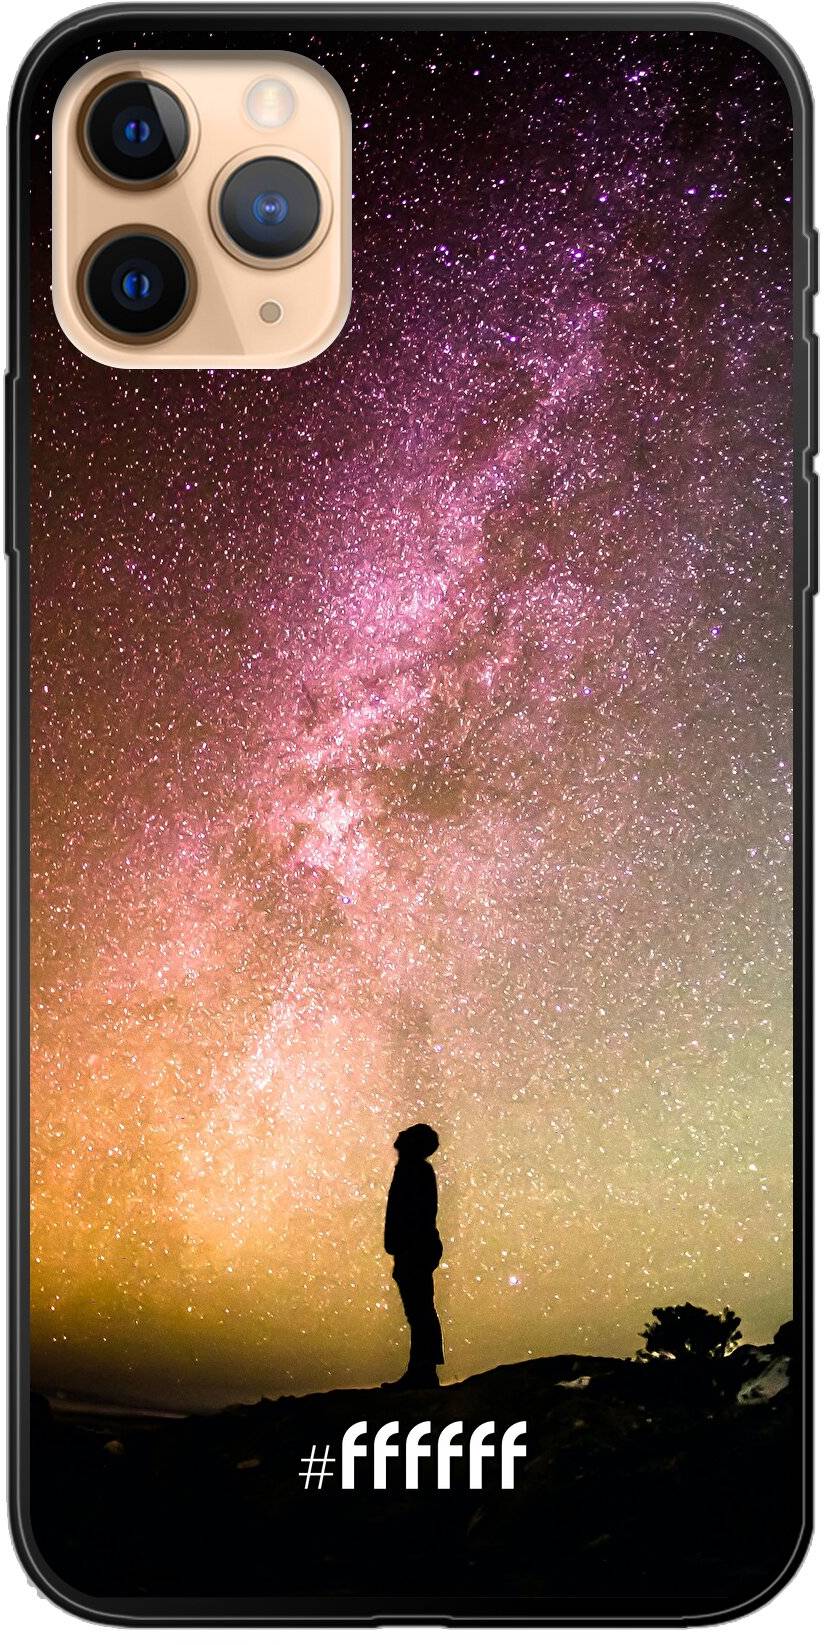 Watching the Stars iPhone 11 Pro Max